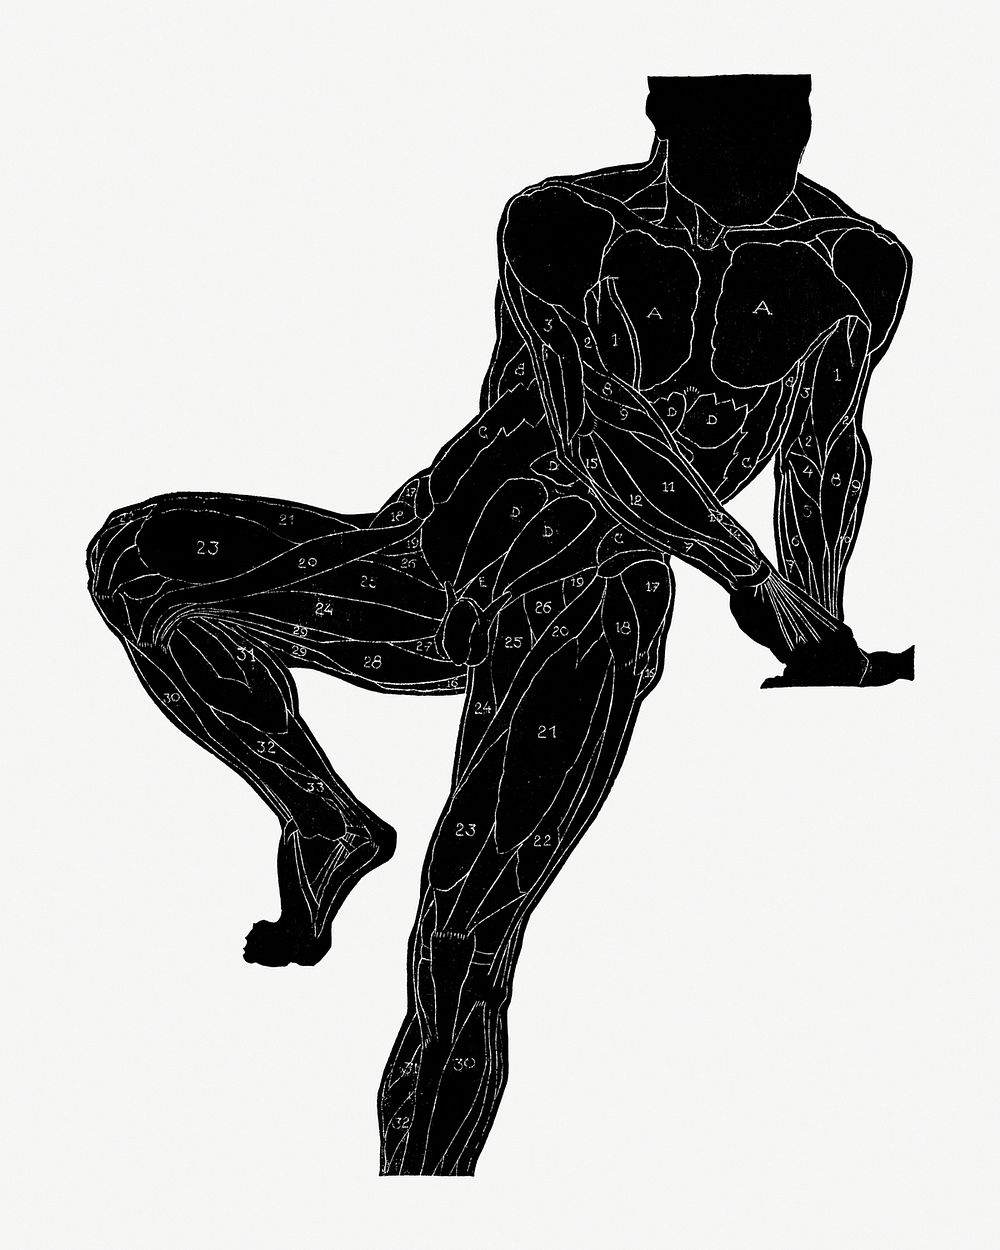 Human anatomy psd in silhouette print, remixed from artworks by Reijer Stolk